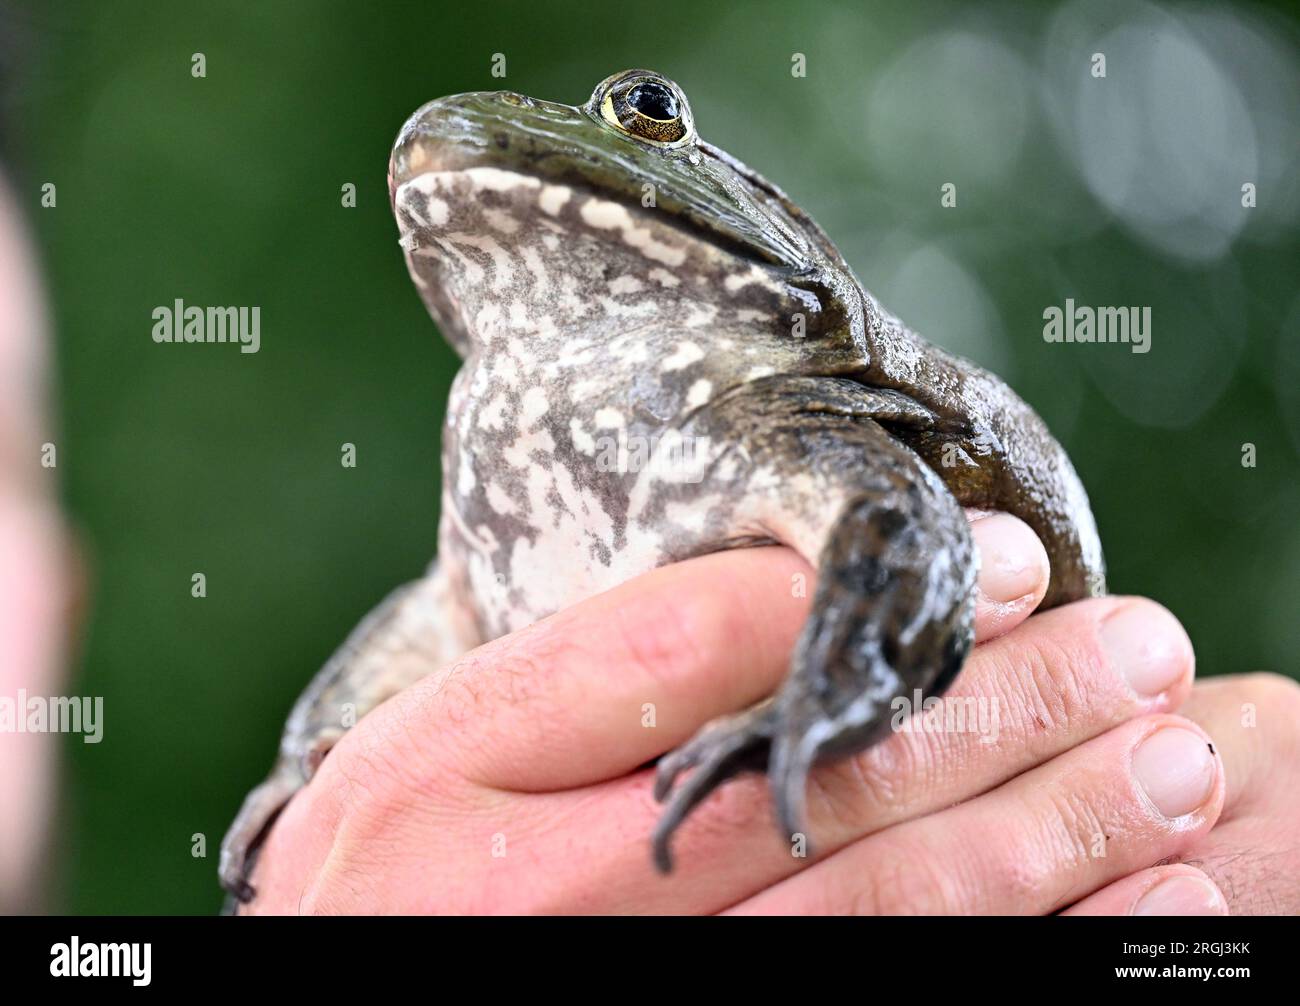 09 August 2023, Rhineland-Palatinate, Hördt: At an informational meeting of the Struktur- und Genehmigungsdirektion Süd (SGD Süd) on the bullfrog, a live captive North American bullfrog is shown, it is a female that is about four years old. Photo: Uli Deck/dpa Stock Photo